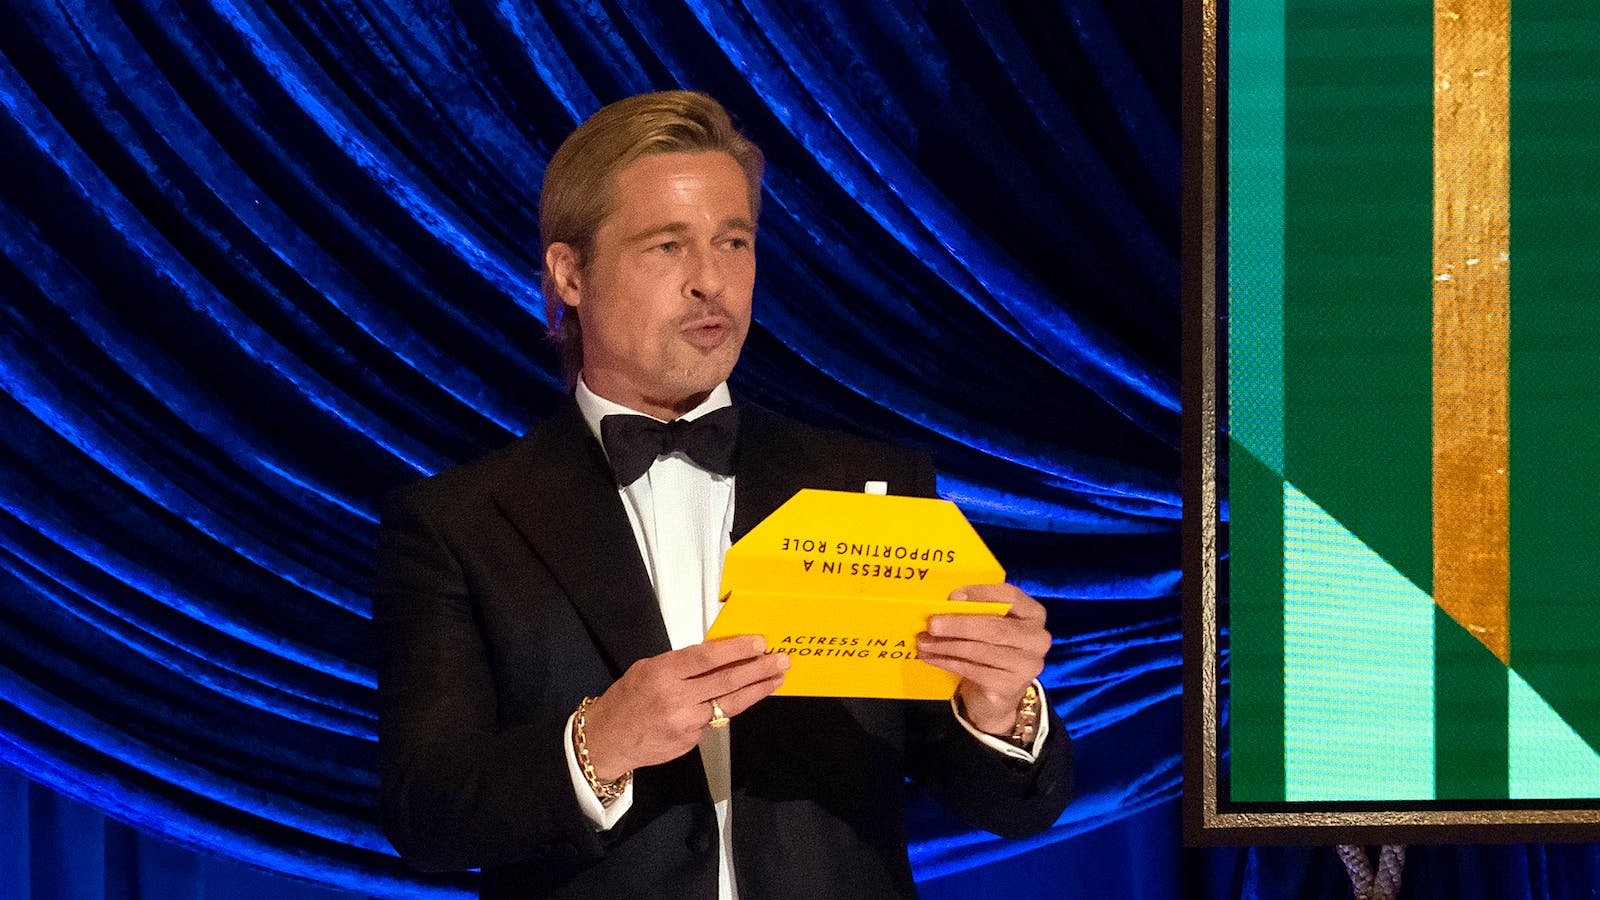 Brad Pitt Says Angelina Jolie Sought to Inflict Harm on Château Miraval